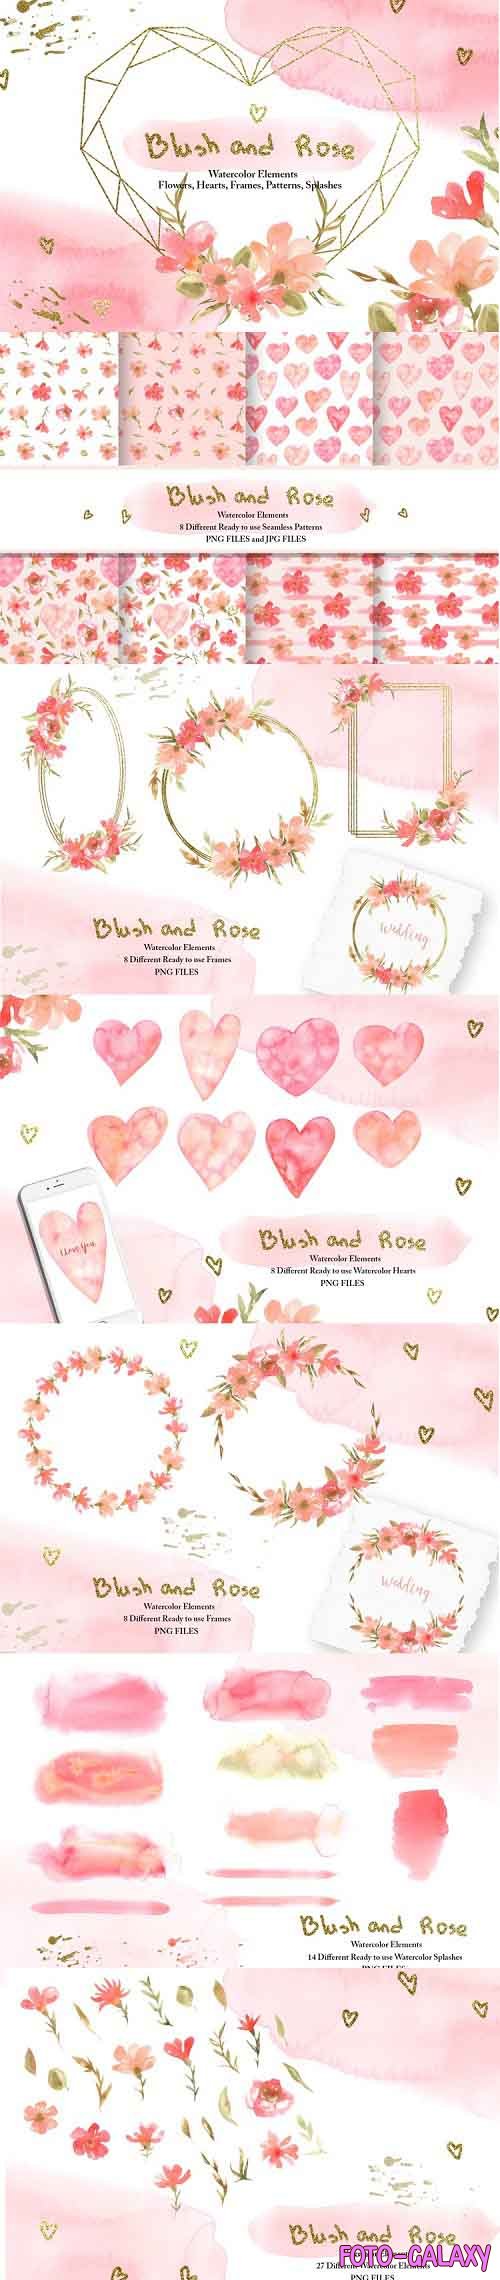 Watercolor Blush and Rose Collection - 1110740